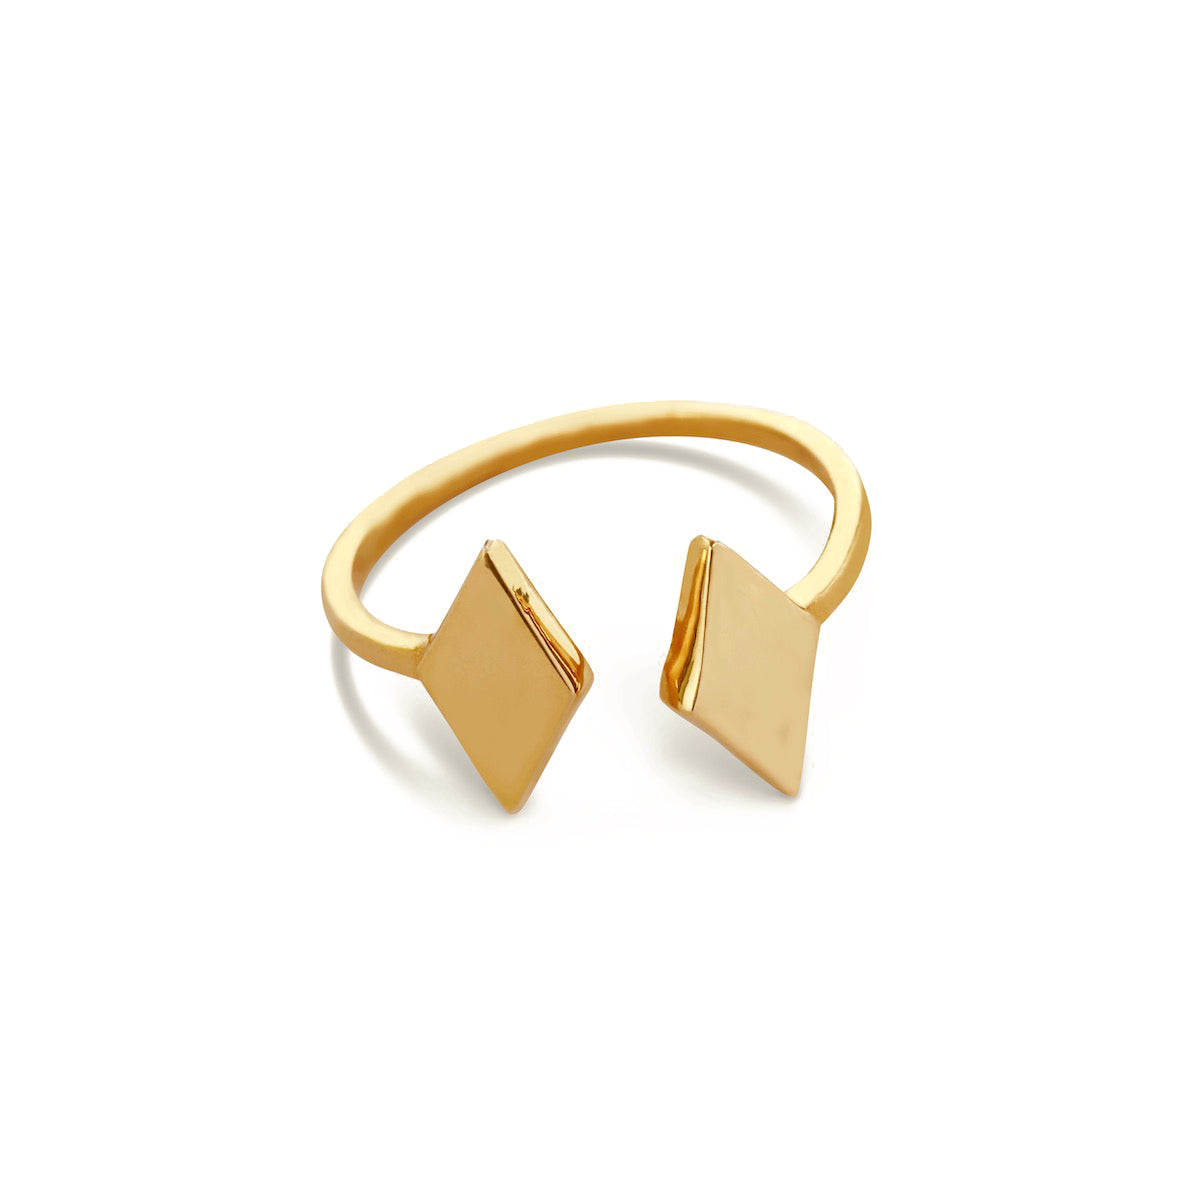 Rhombus Duet Ring for women, Jewelry for girlfriend, minimalist jewellery, real gold jewelry, gold ring